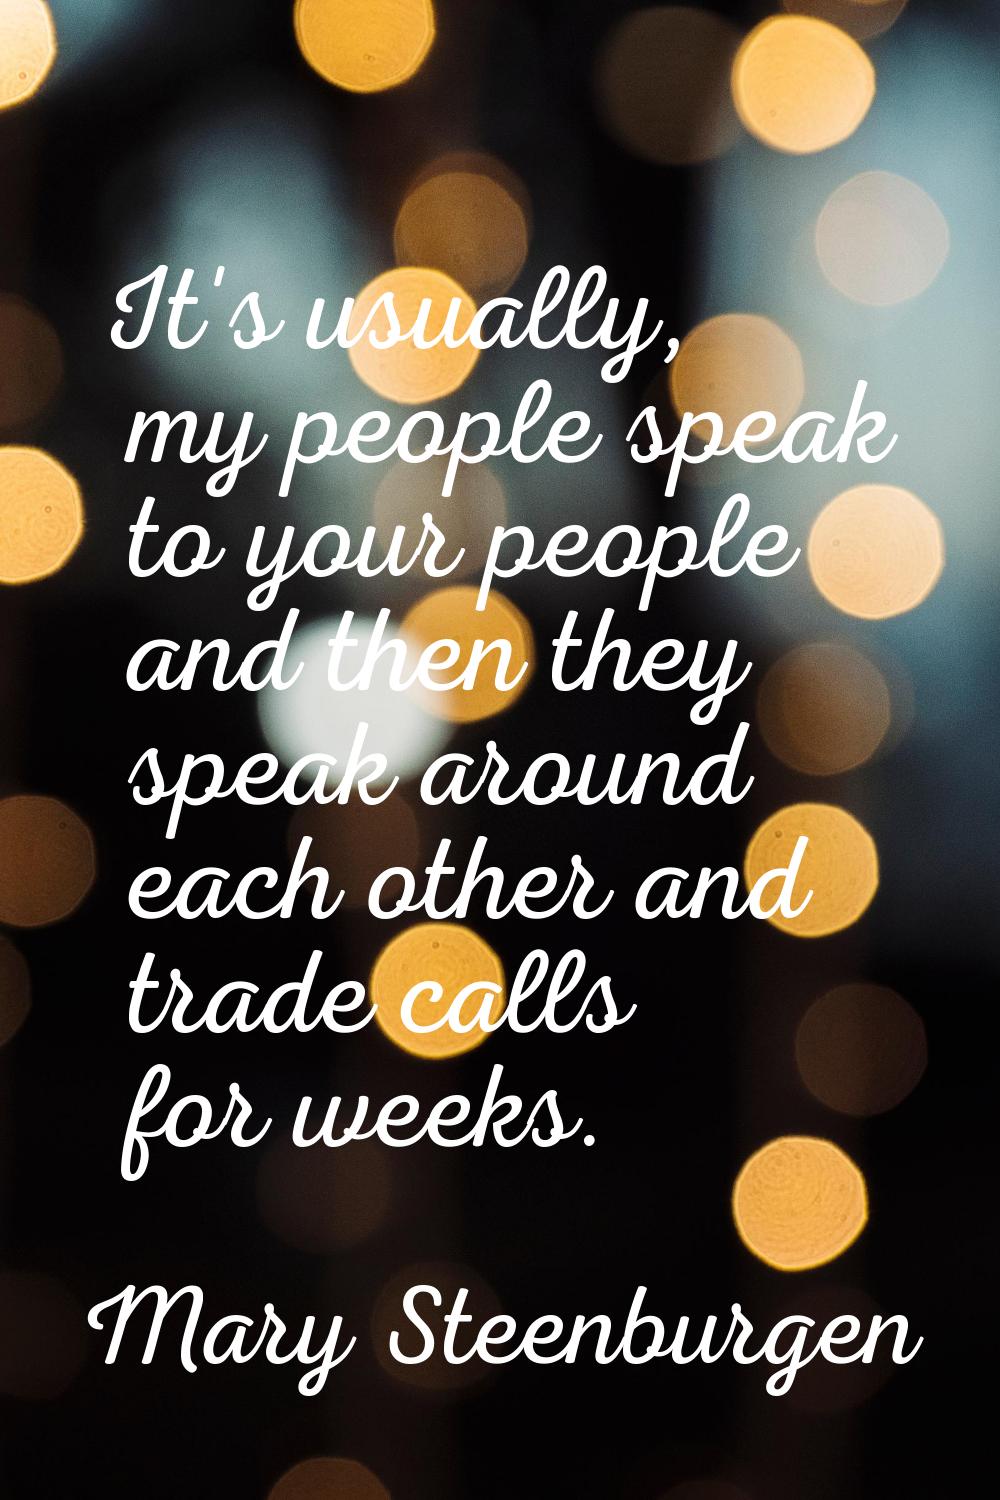 It's usually, my people speak to your people and then they speak around each other and trade calls 